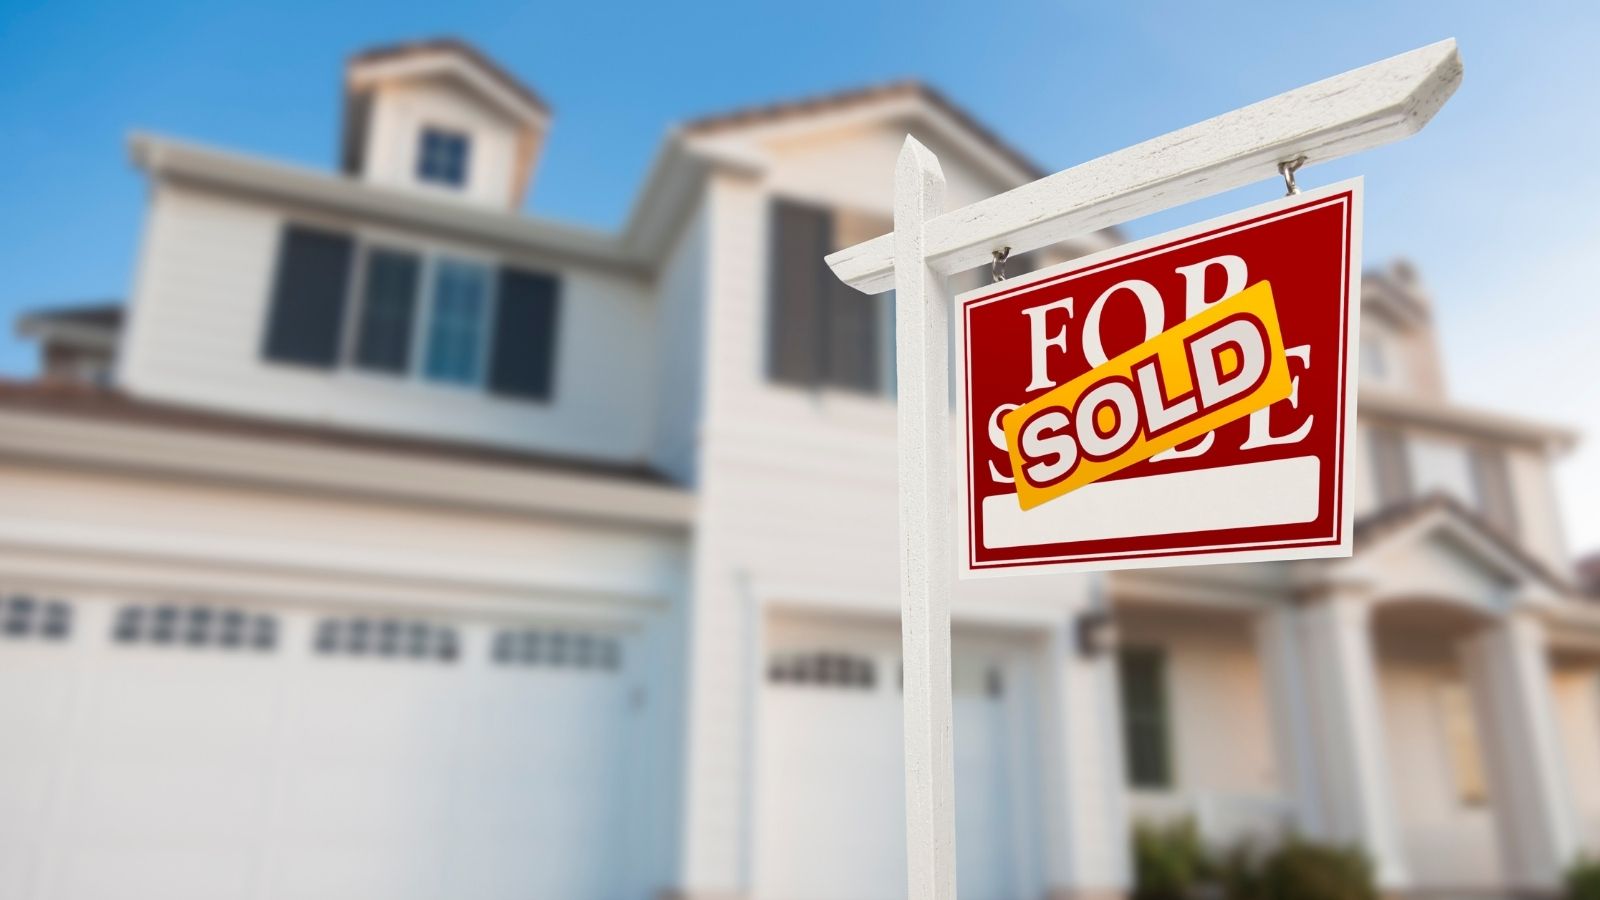 6 Steps to Selling Your Home Fast